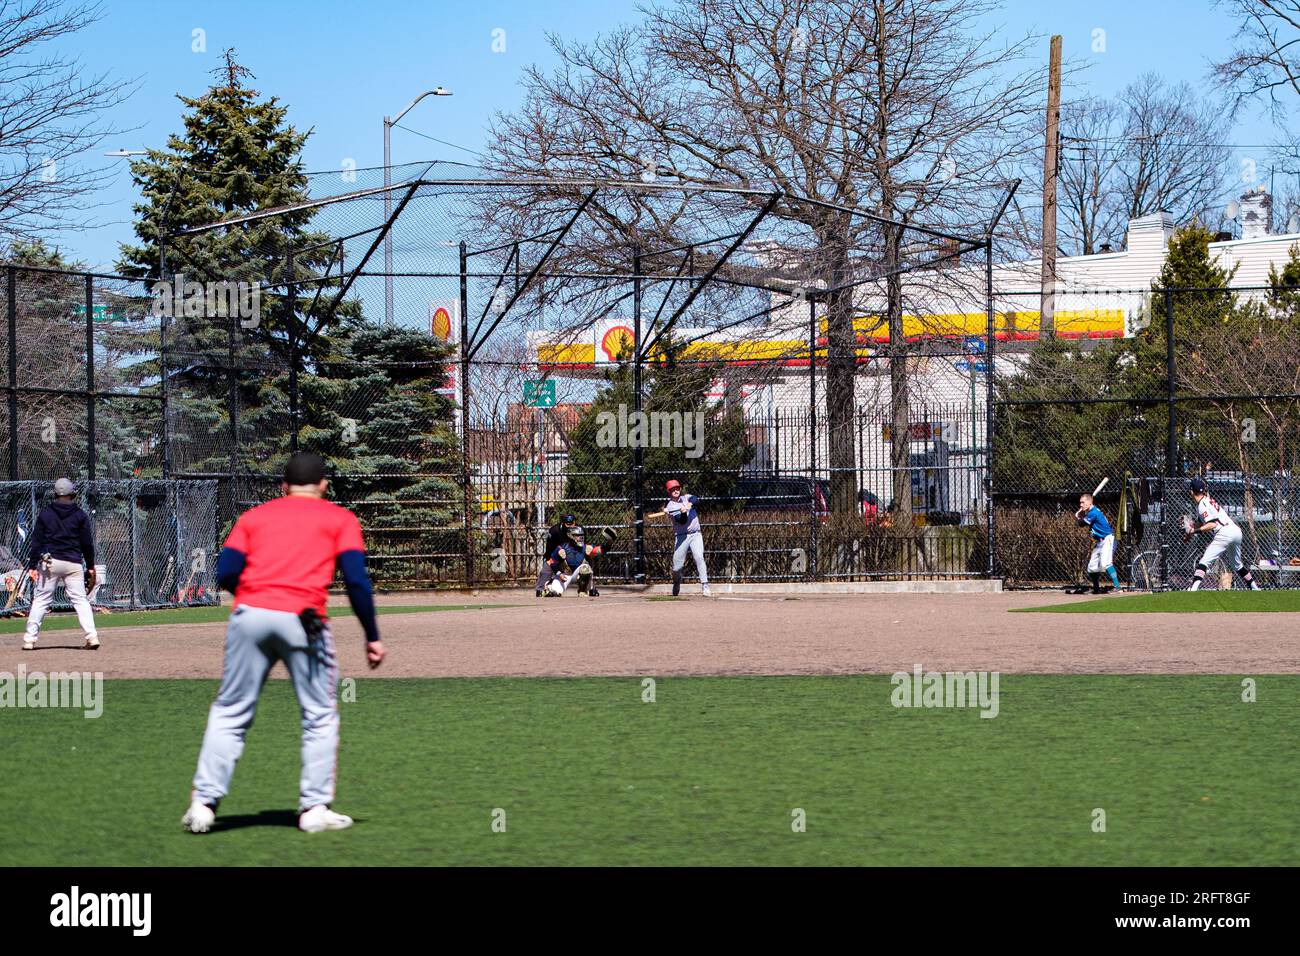 Amateur baseball under the sun in Forest Park, Queens. Springtime camaraderie as the batter connects. Vibrant outdoor play and community spirit captur Stock Photo